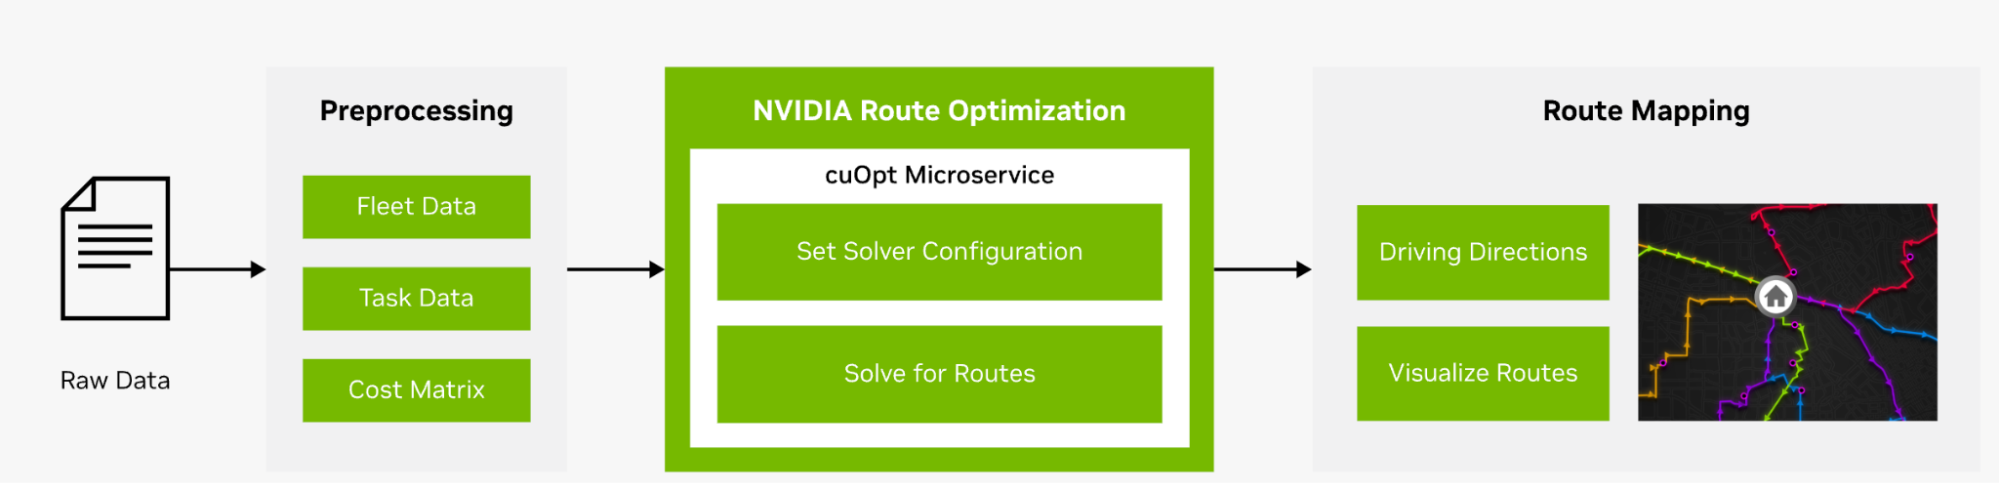 A visual that shows the route optimization workflow diagram.